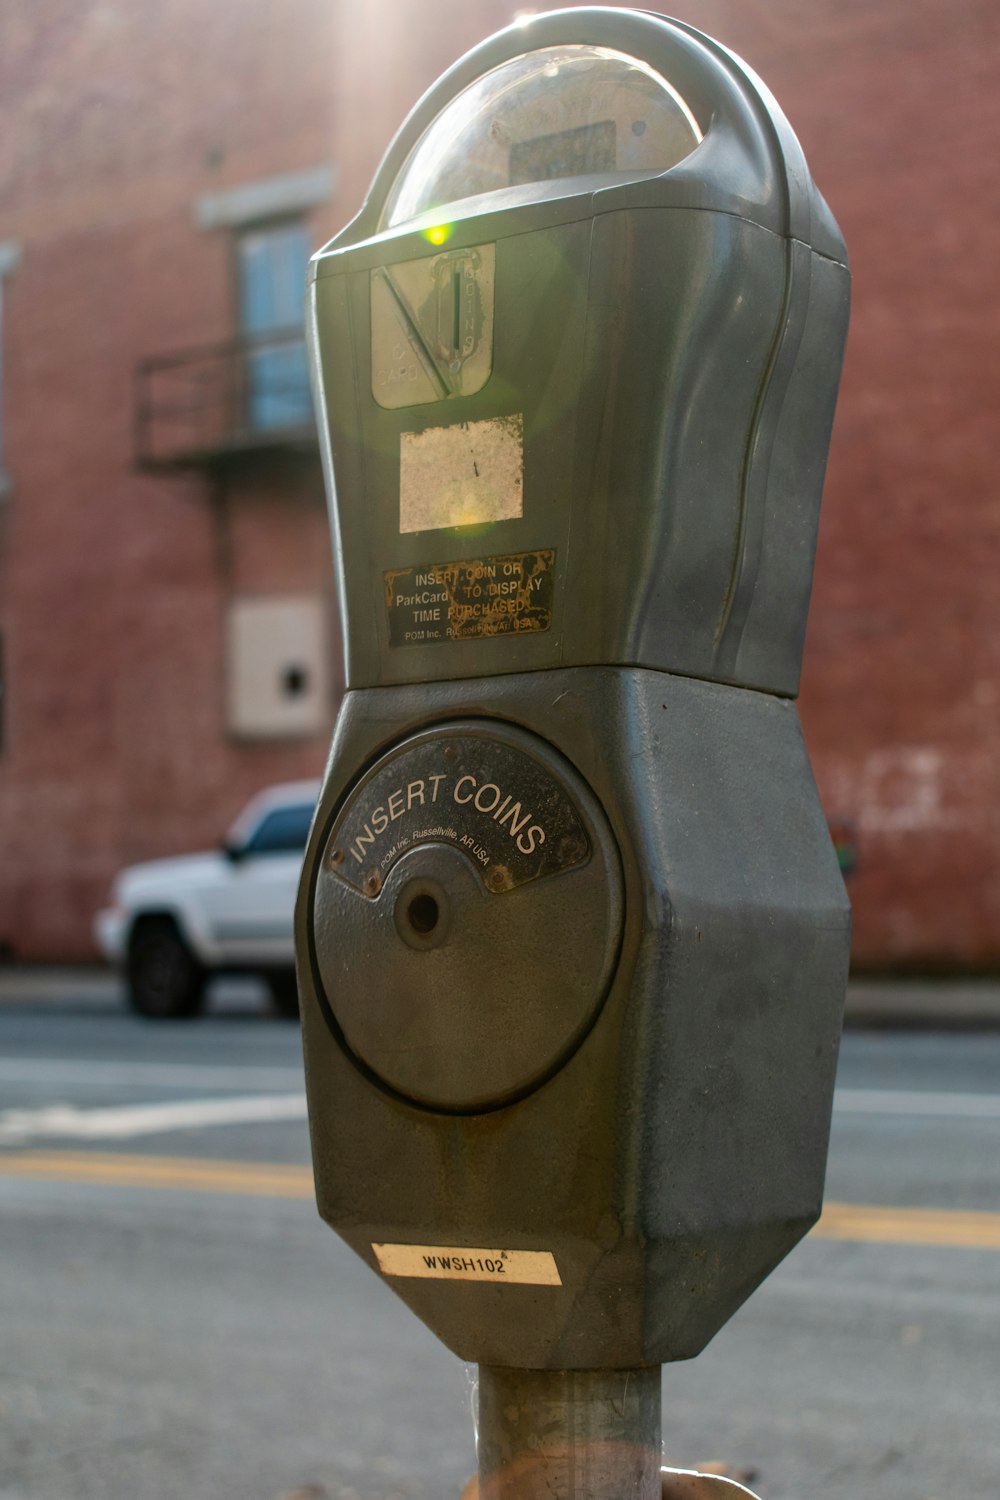 black and gray parking meter